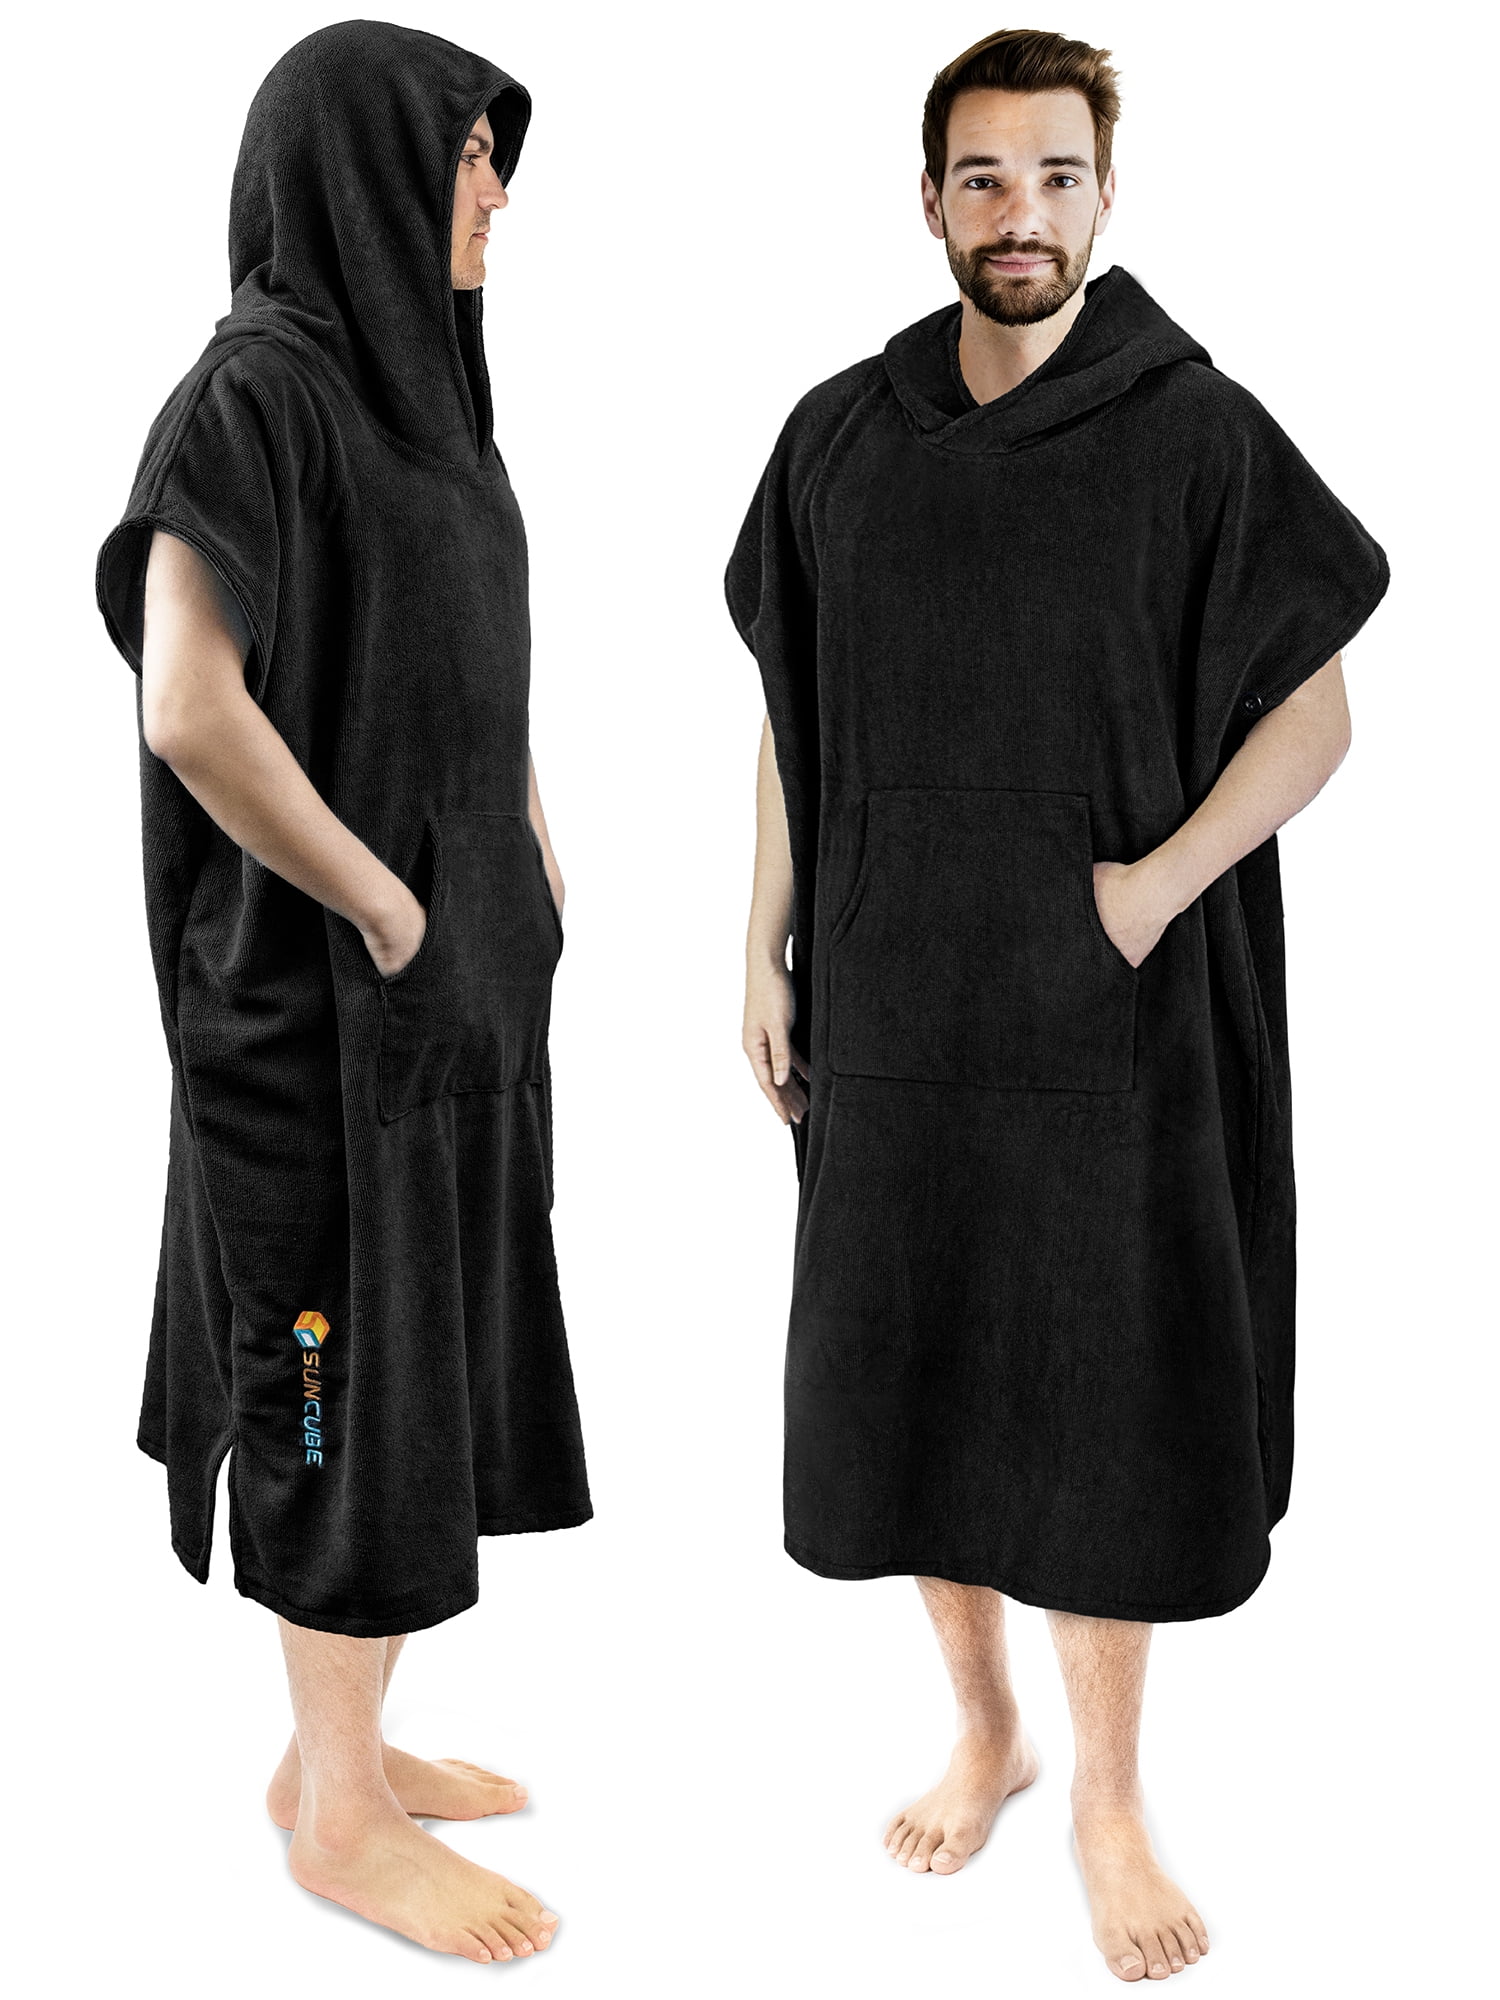 Quick Dry Microfiber Wetsuit Changing Towel Bath Robe Poncho for Surfing Beach Swim Outdoor Sports Surf Poncho Changing Towel Robe with Hood 